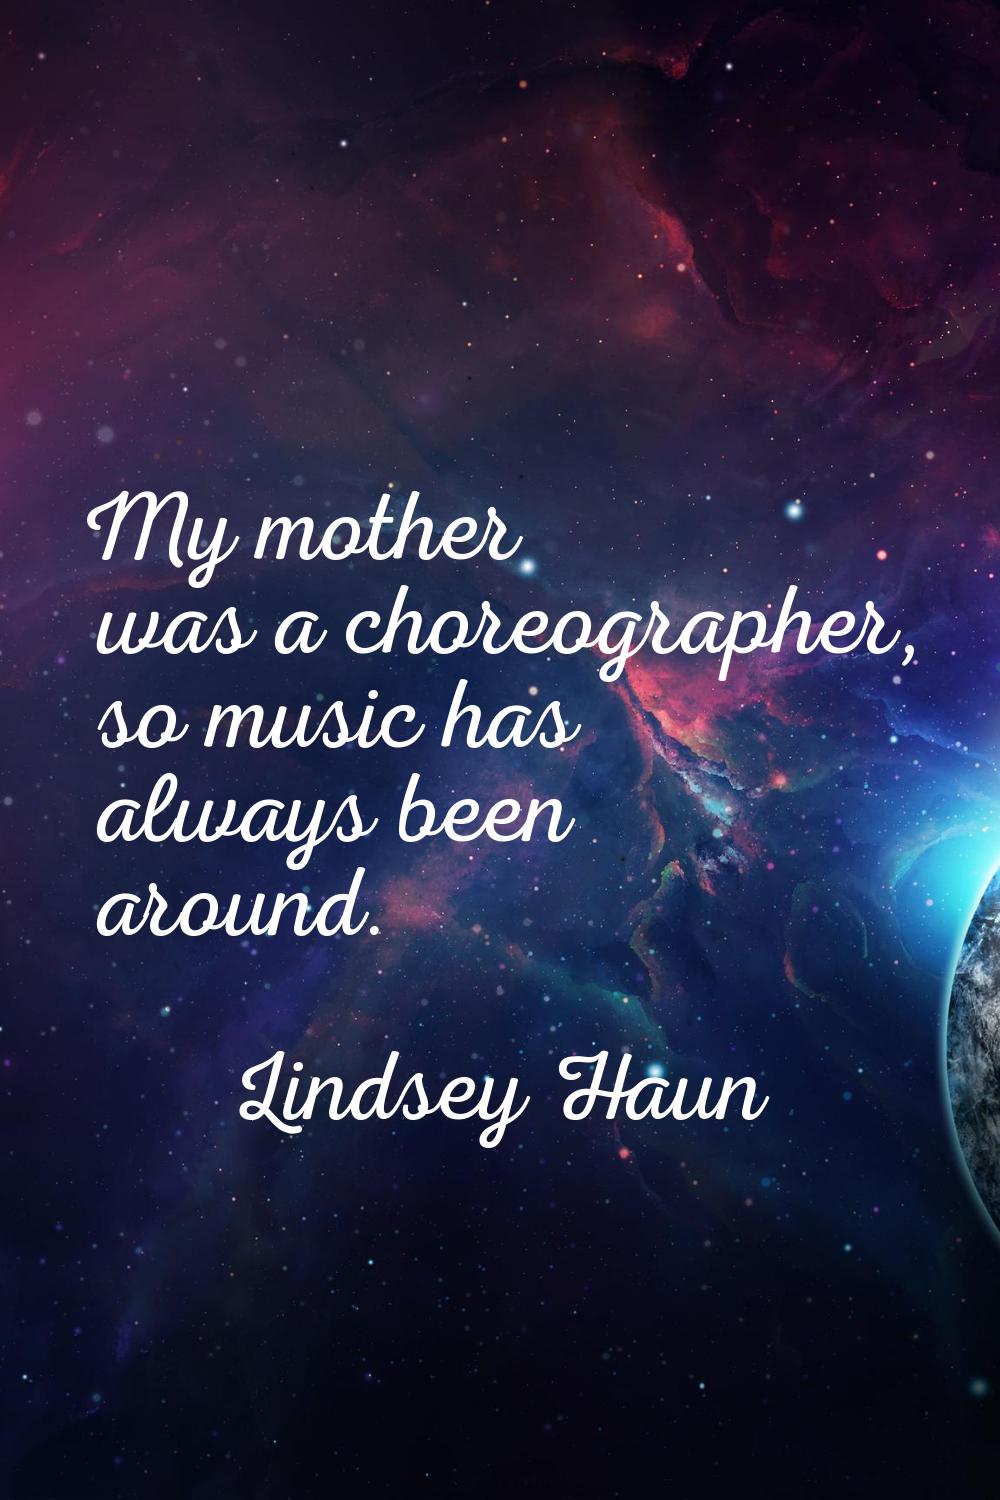 My mother was a choreographer, so music has always been around.